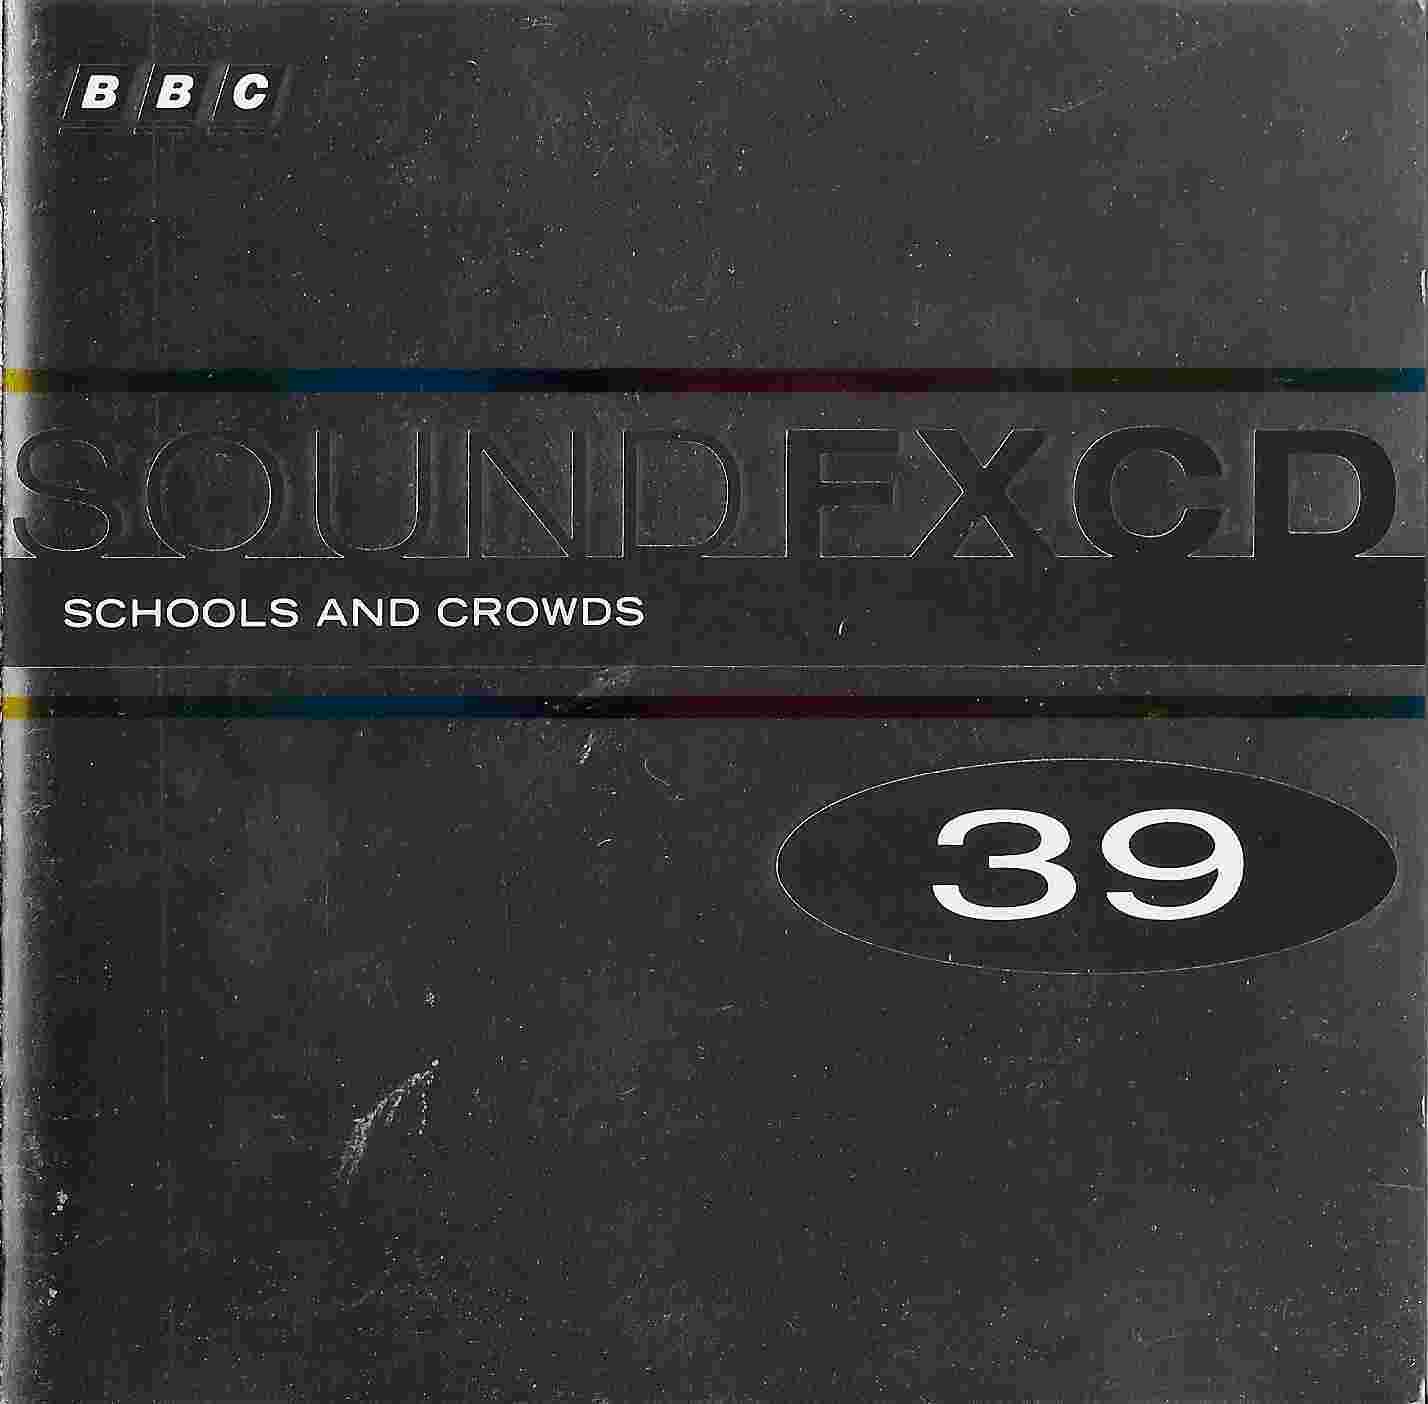 Front cover of BBCCD SFX039